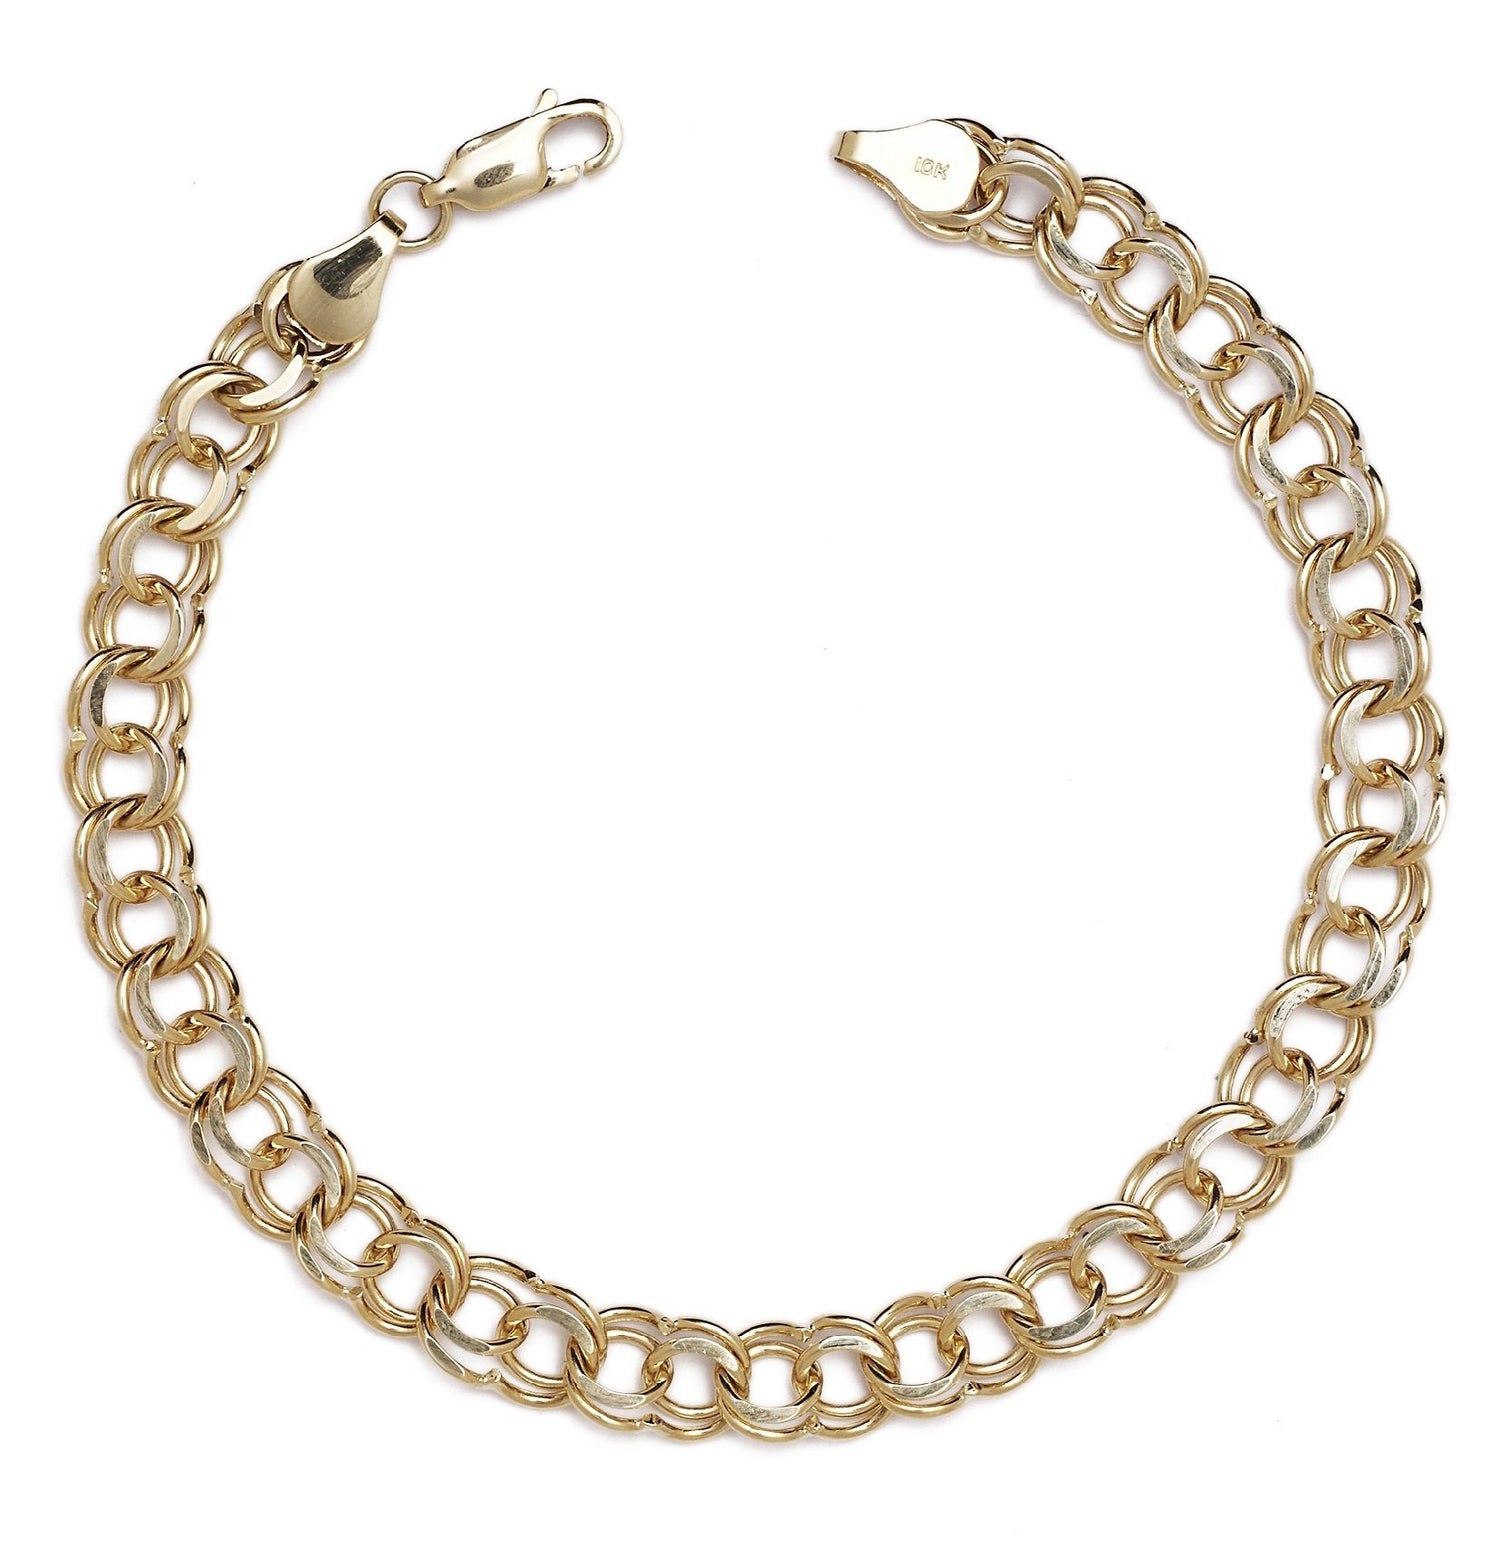 10k Yellow Gold High Polished Solid Charm Bracelet (0.26